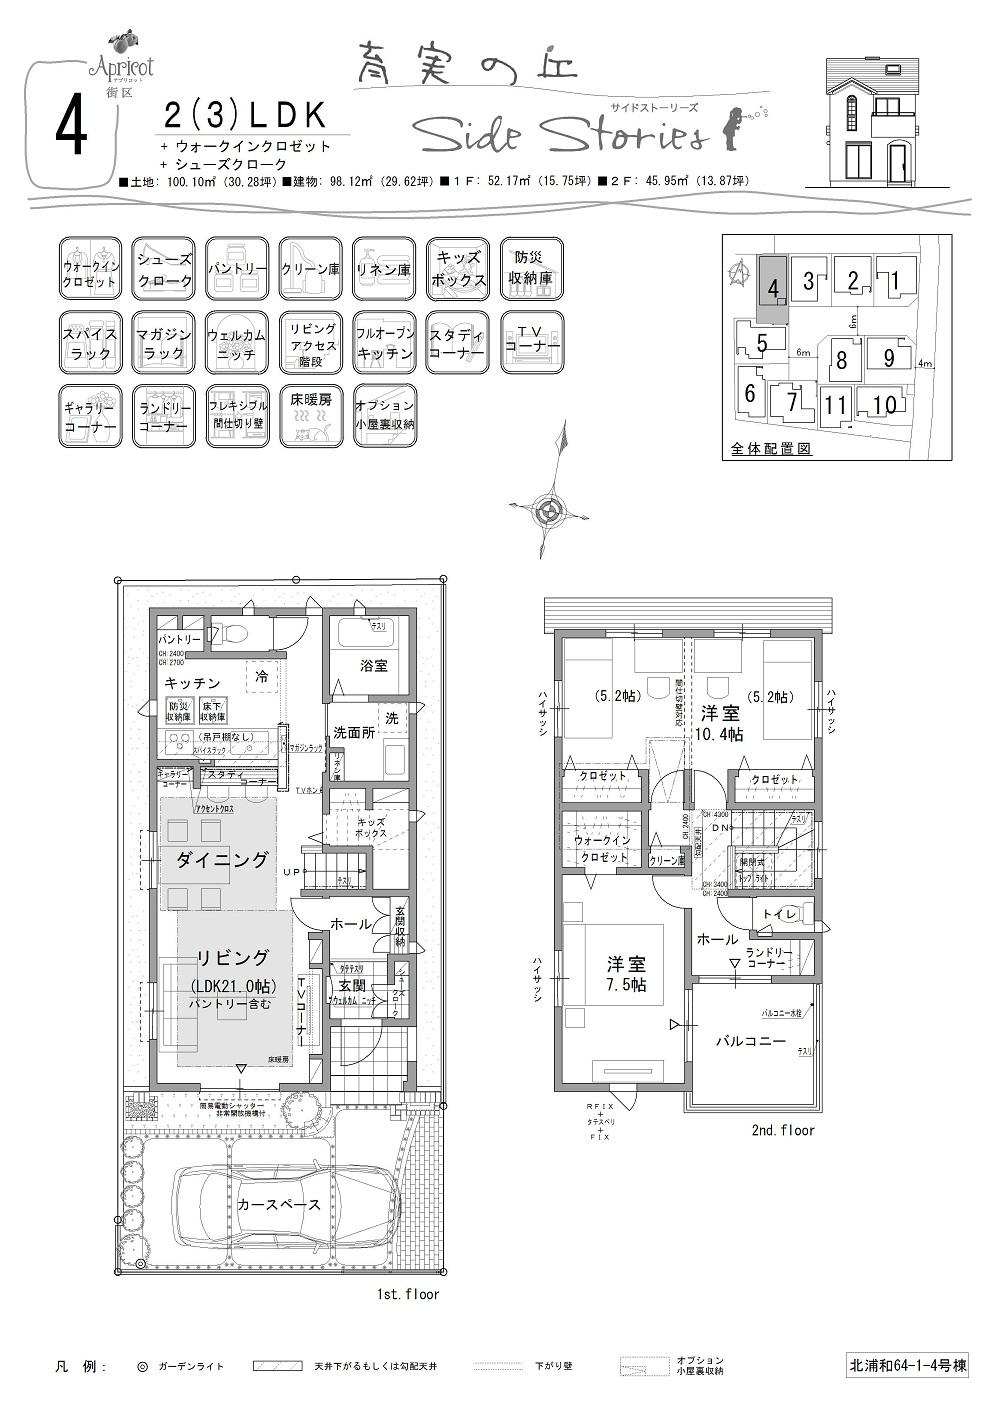 Floor plan. Live for the family of the future, Projects that enhance the child-rearing standards